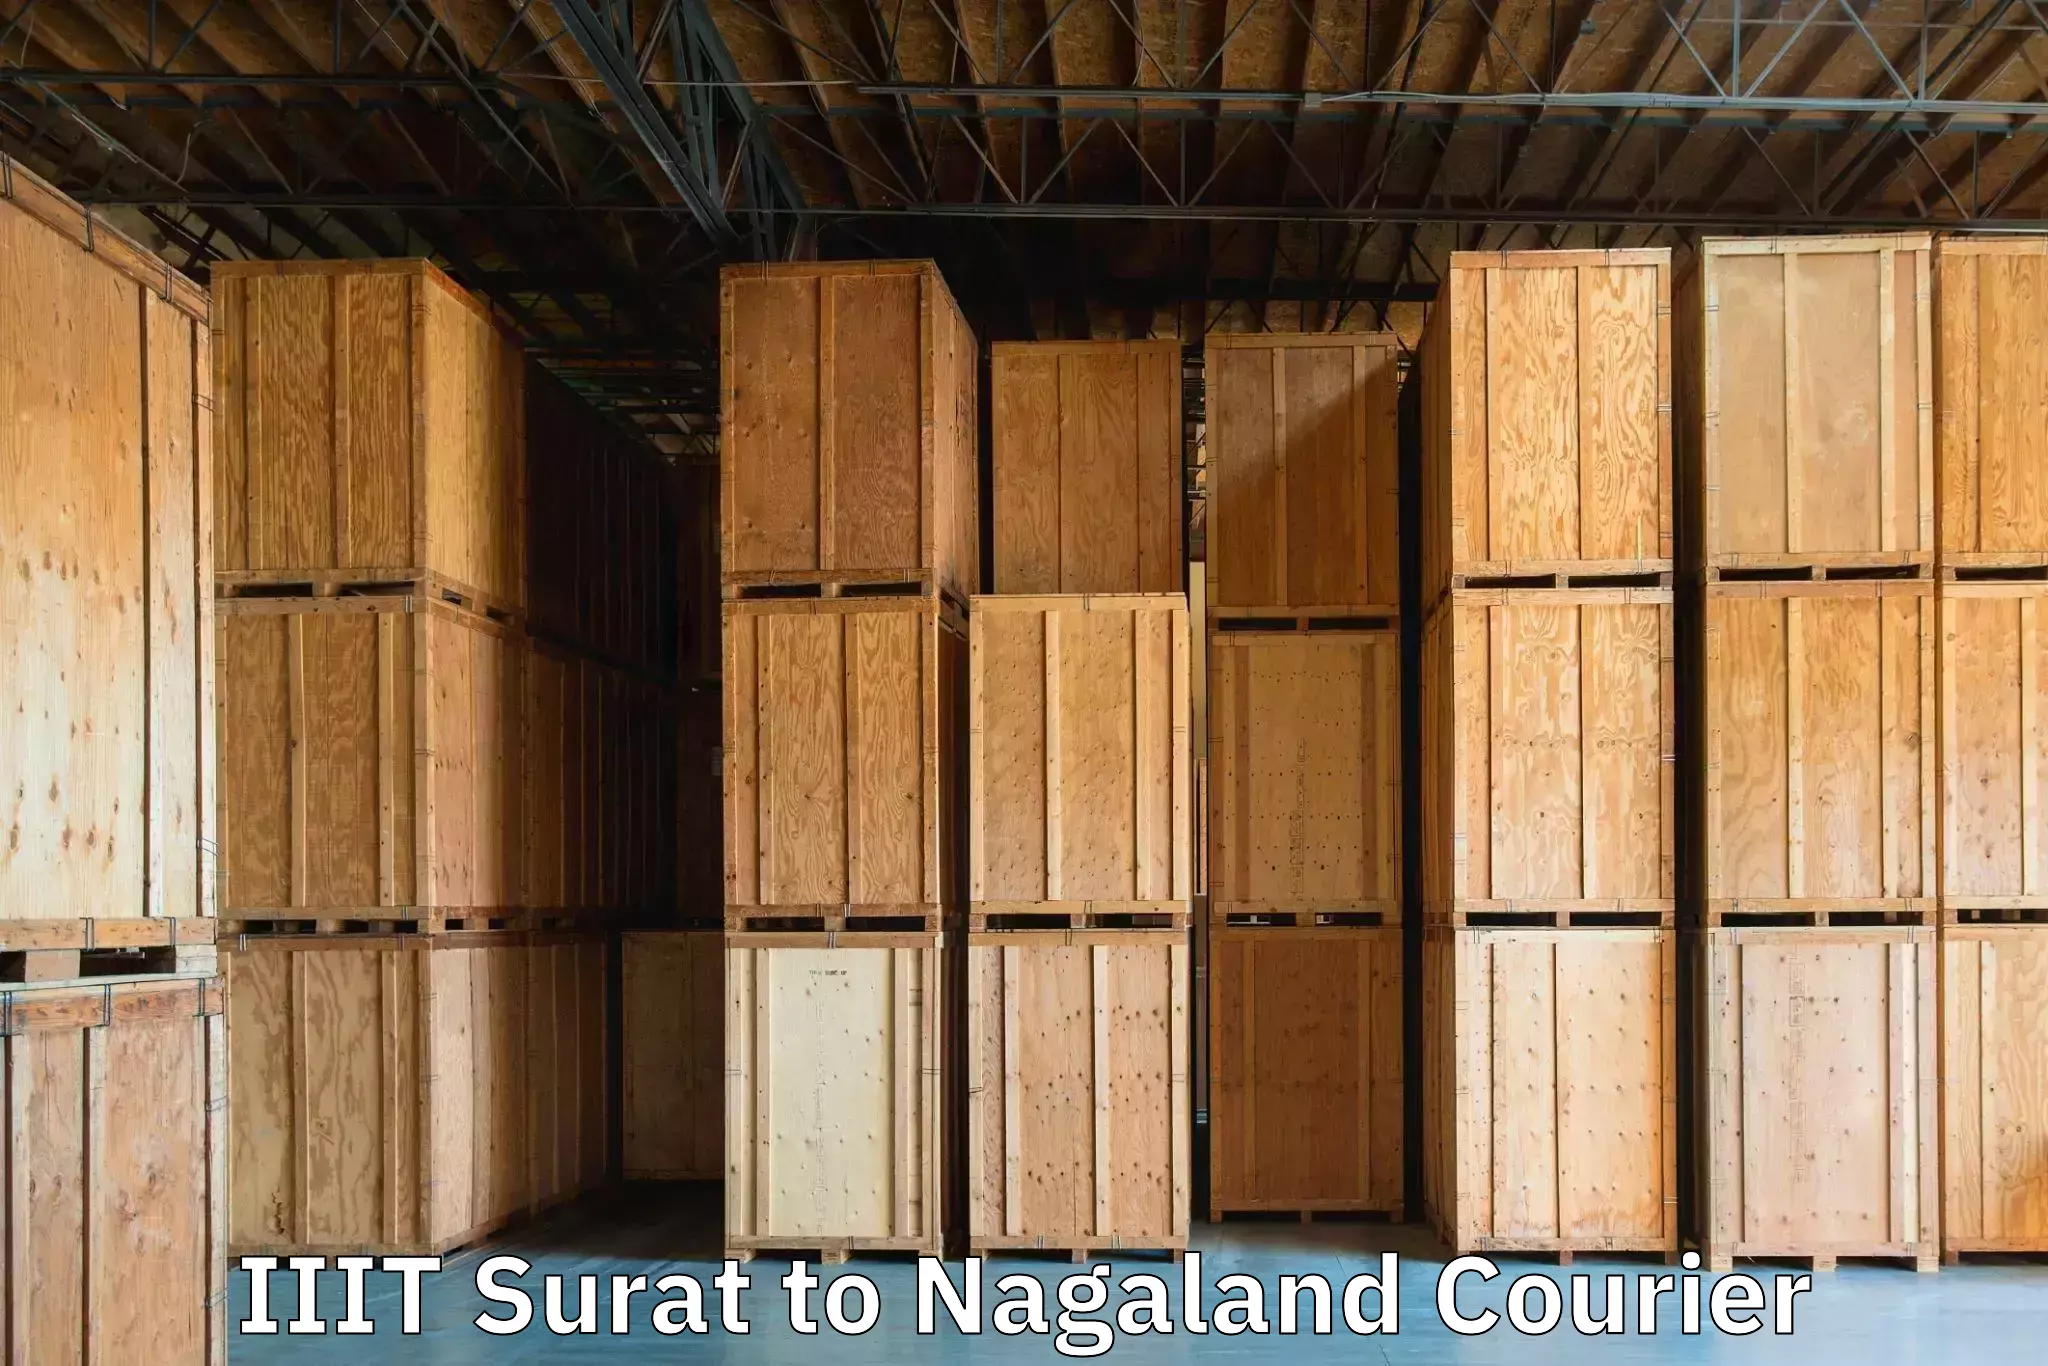 Baggage relocation service IIIT Surat to Nagaland